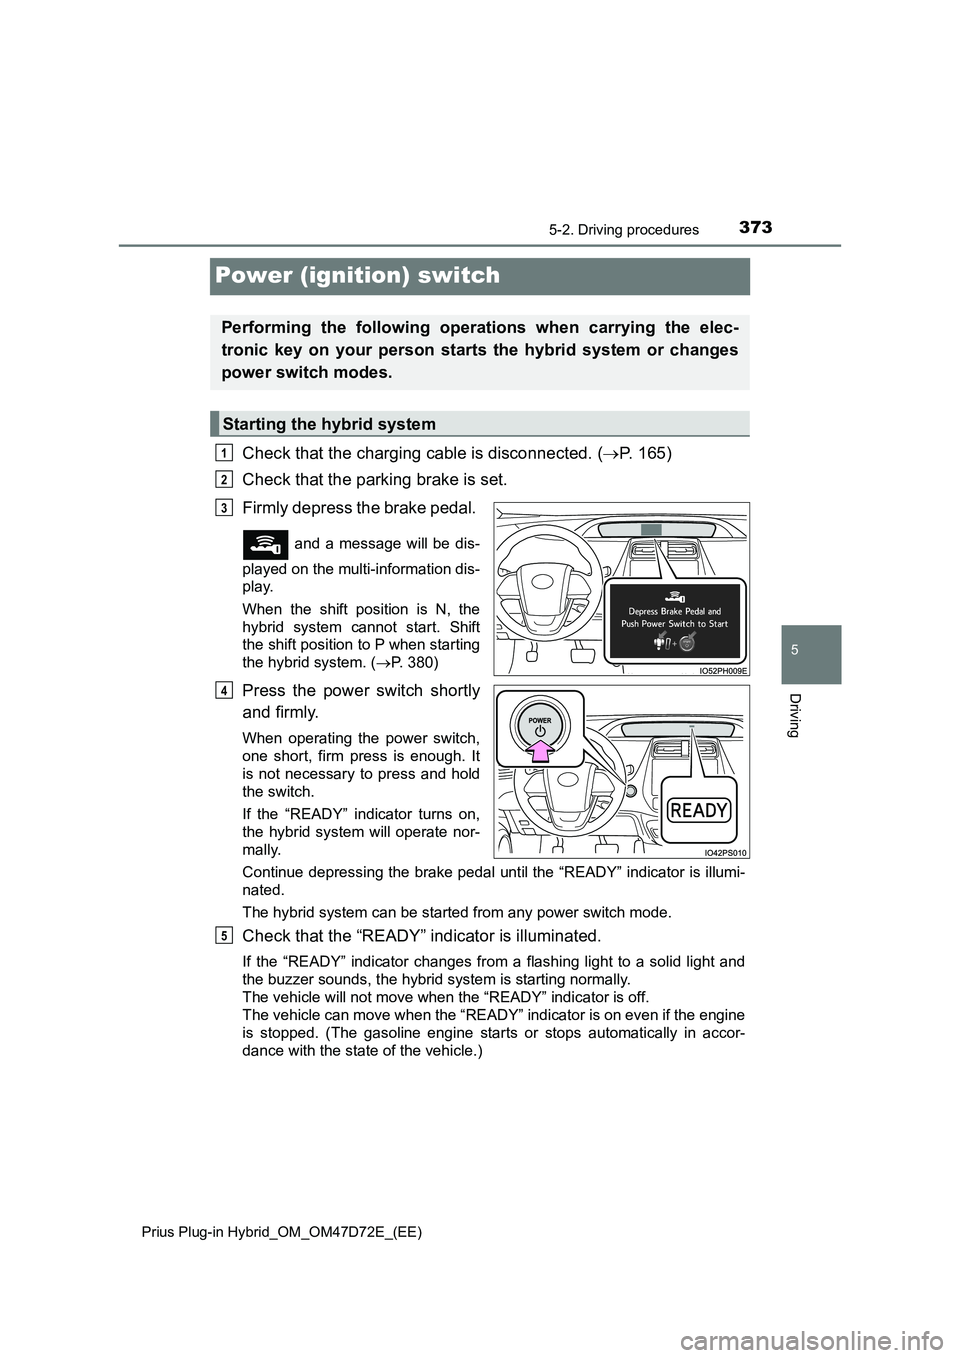 TOYOTA PRIUS PLUG-IN HYBRID 2021  Owners Manual 3735-2. Driving procedures
Prius Plug-in Hybrid_OM_OM47D72E_(EE)
5
Driving
Power (ignition) switch
Check that the charging cable is disconnected. (P. 165)
Check that the parking brake is set. 
Firm